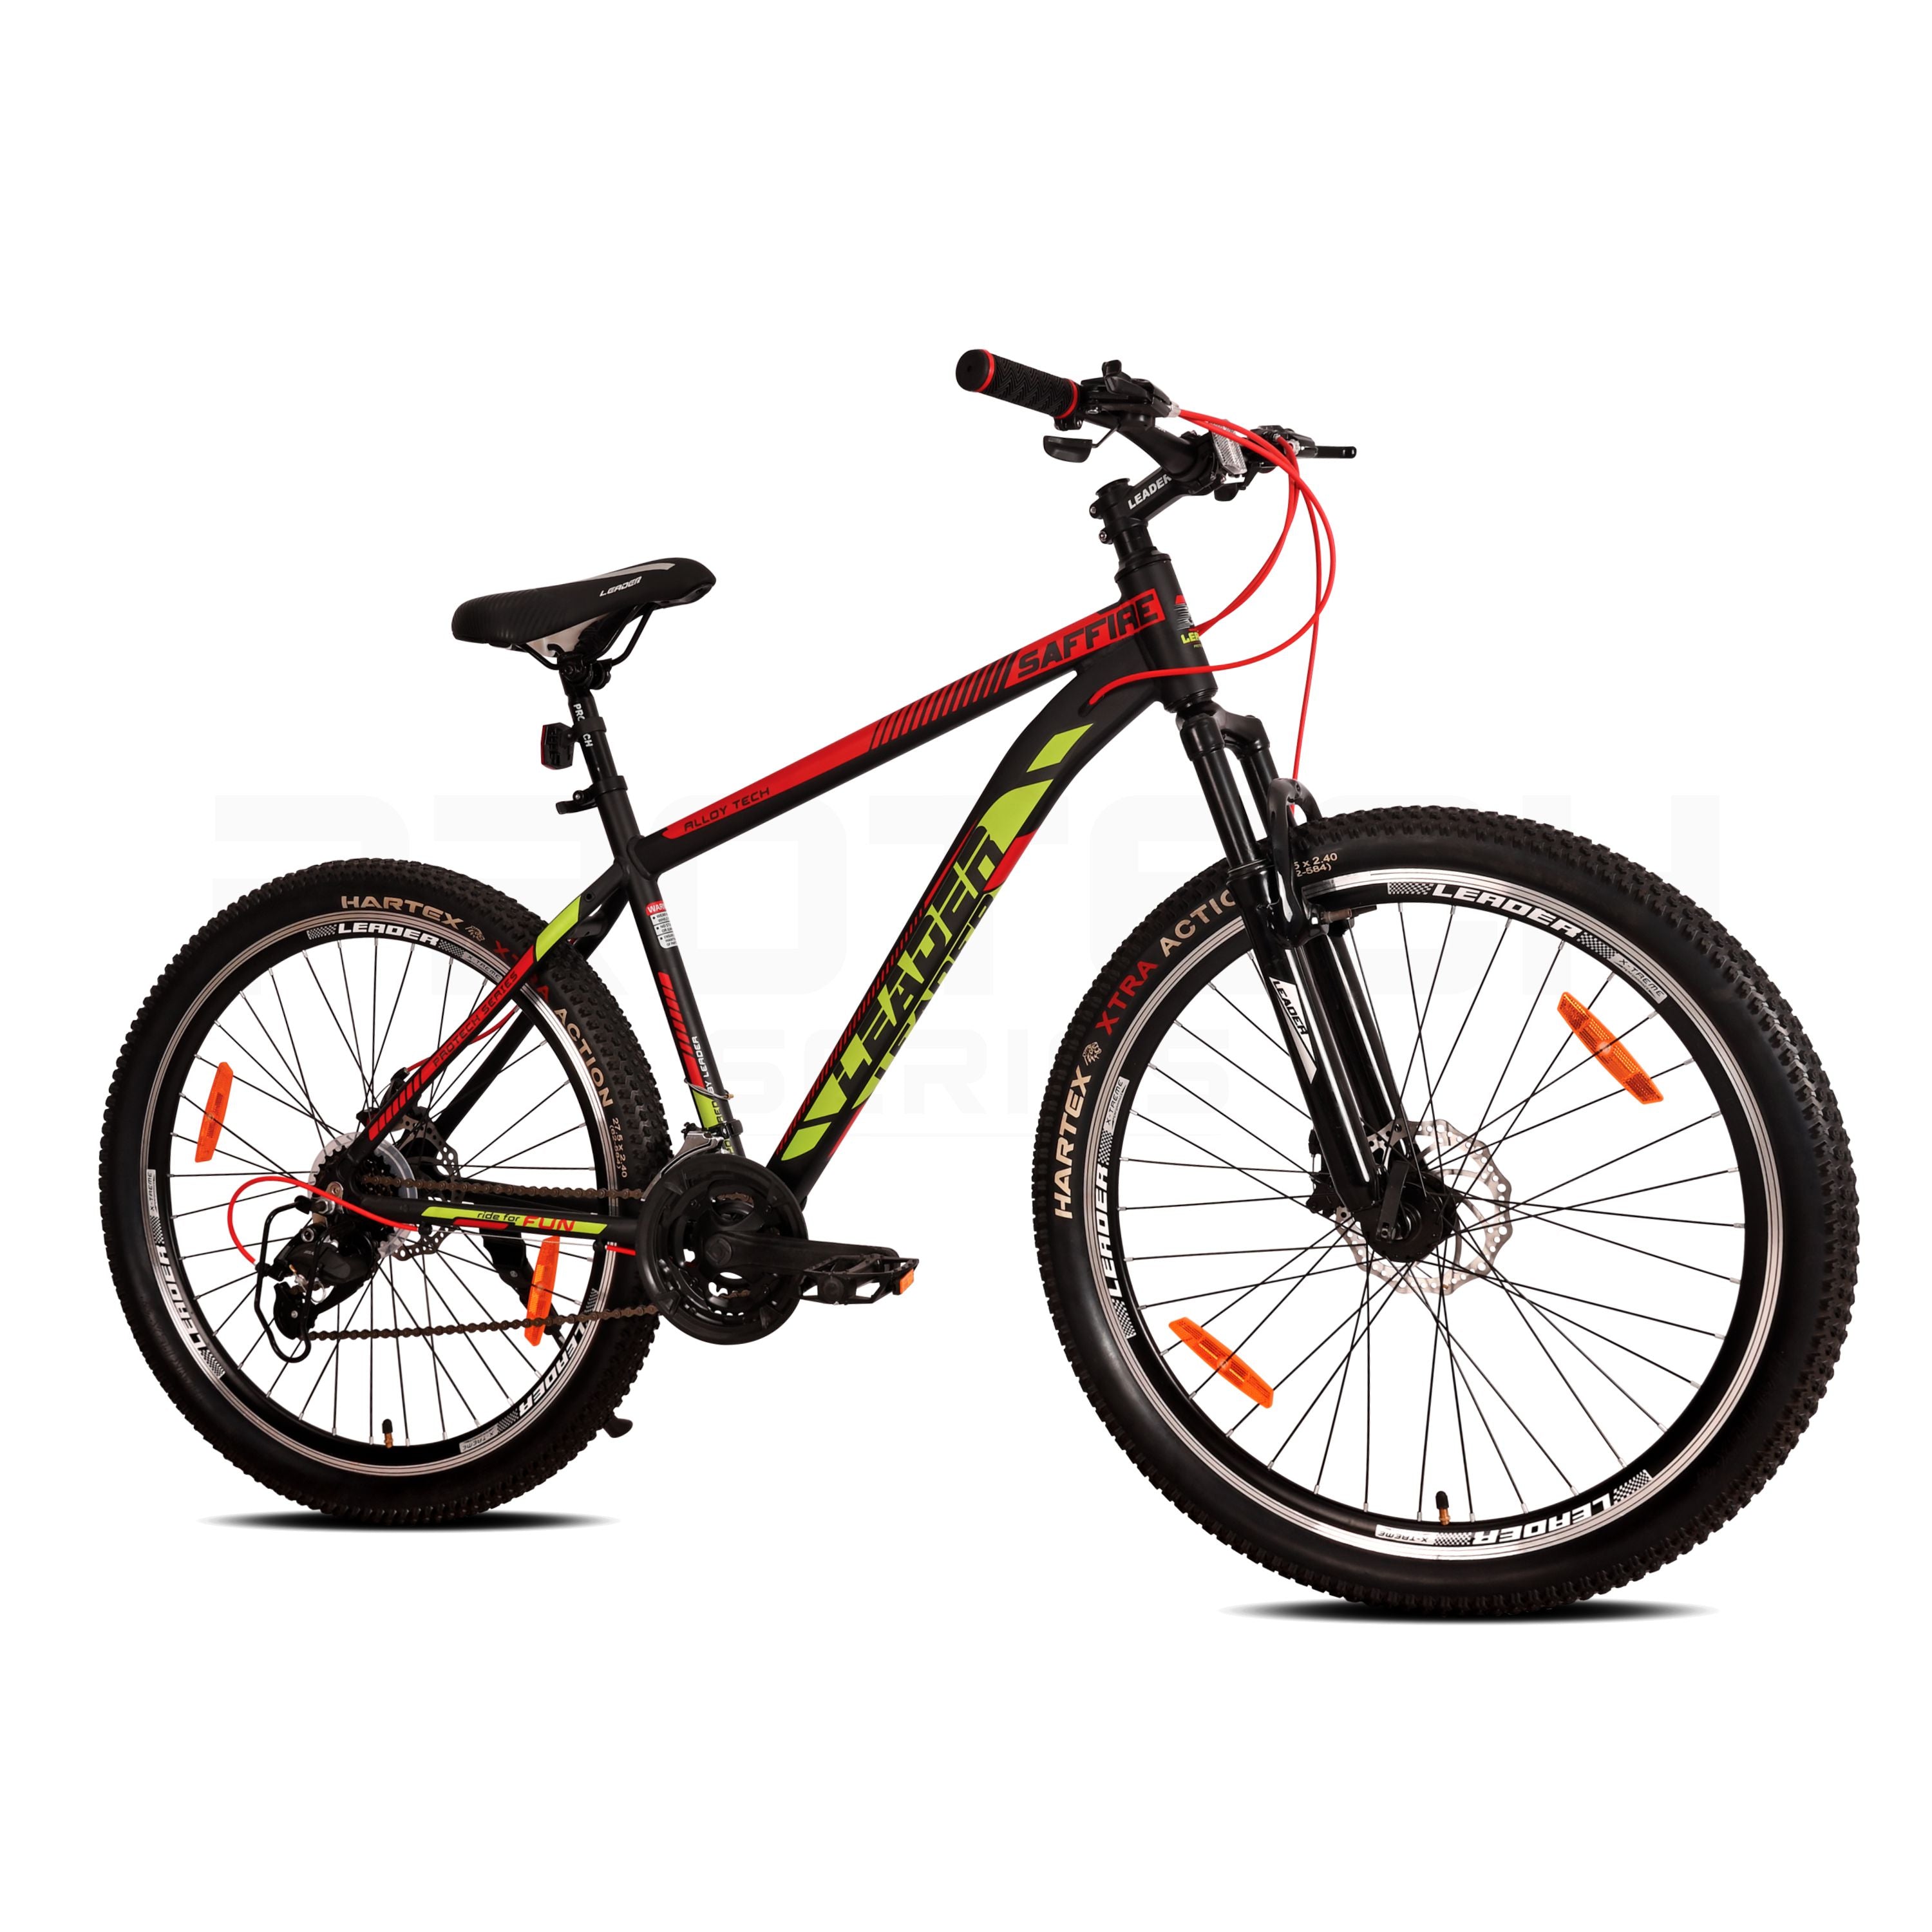 Leader Saffire 27.5T 21 Speed Alloy cycle with Dual Disc Brake